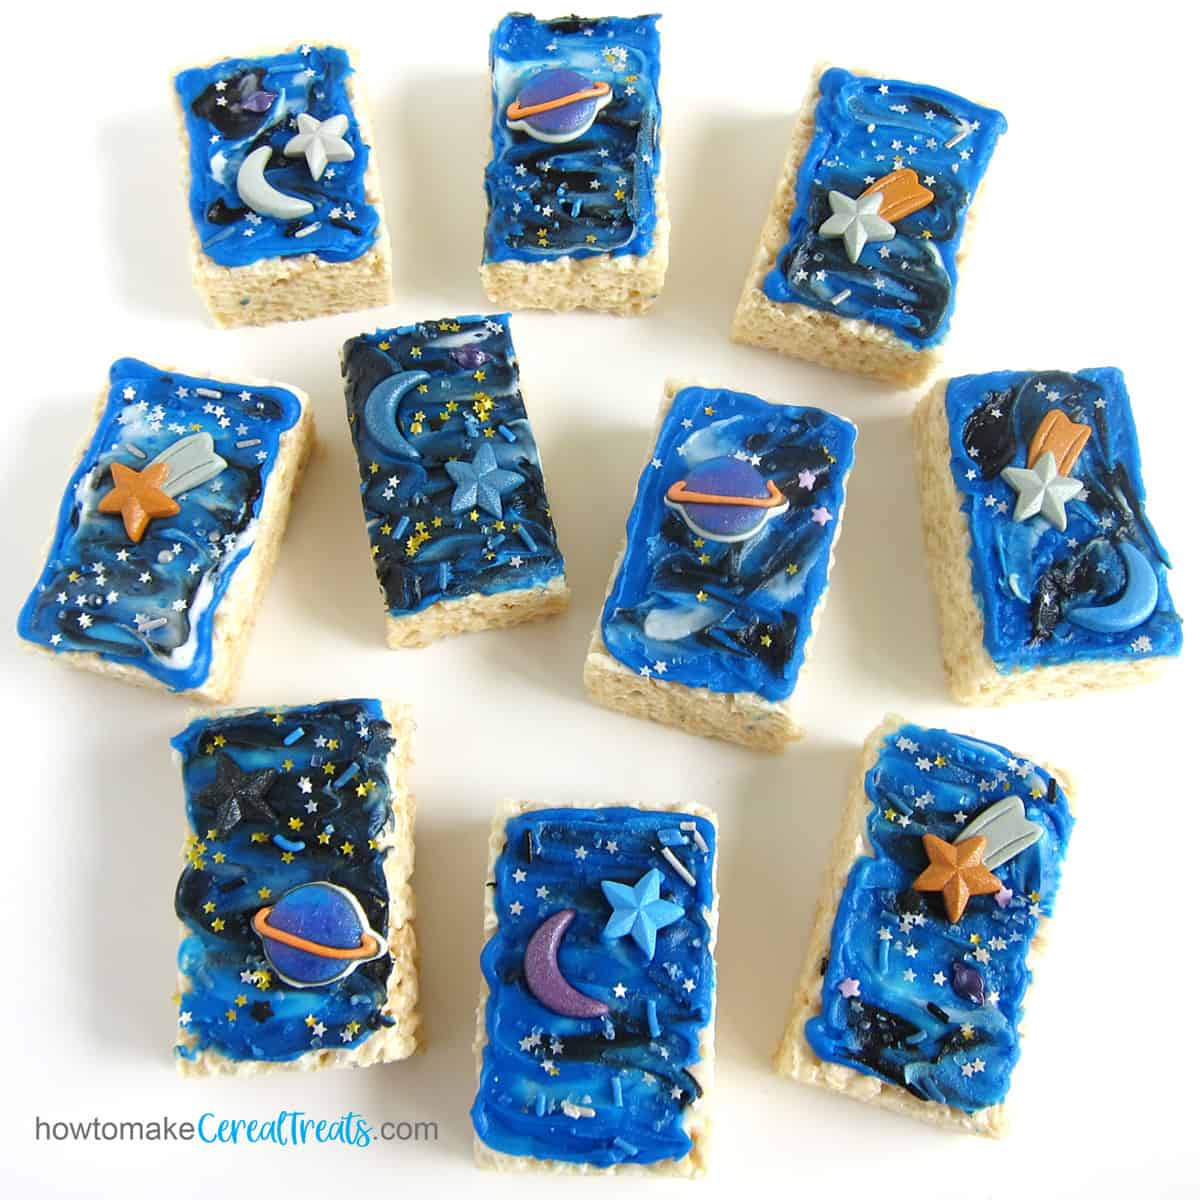 Frosted galaxy rice krispie treats decorated with stars, moons, and planets.